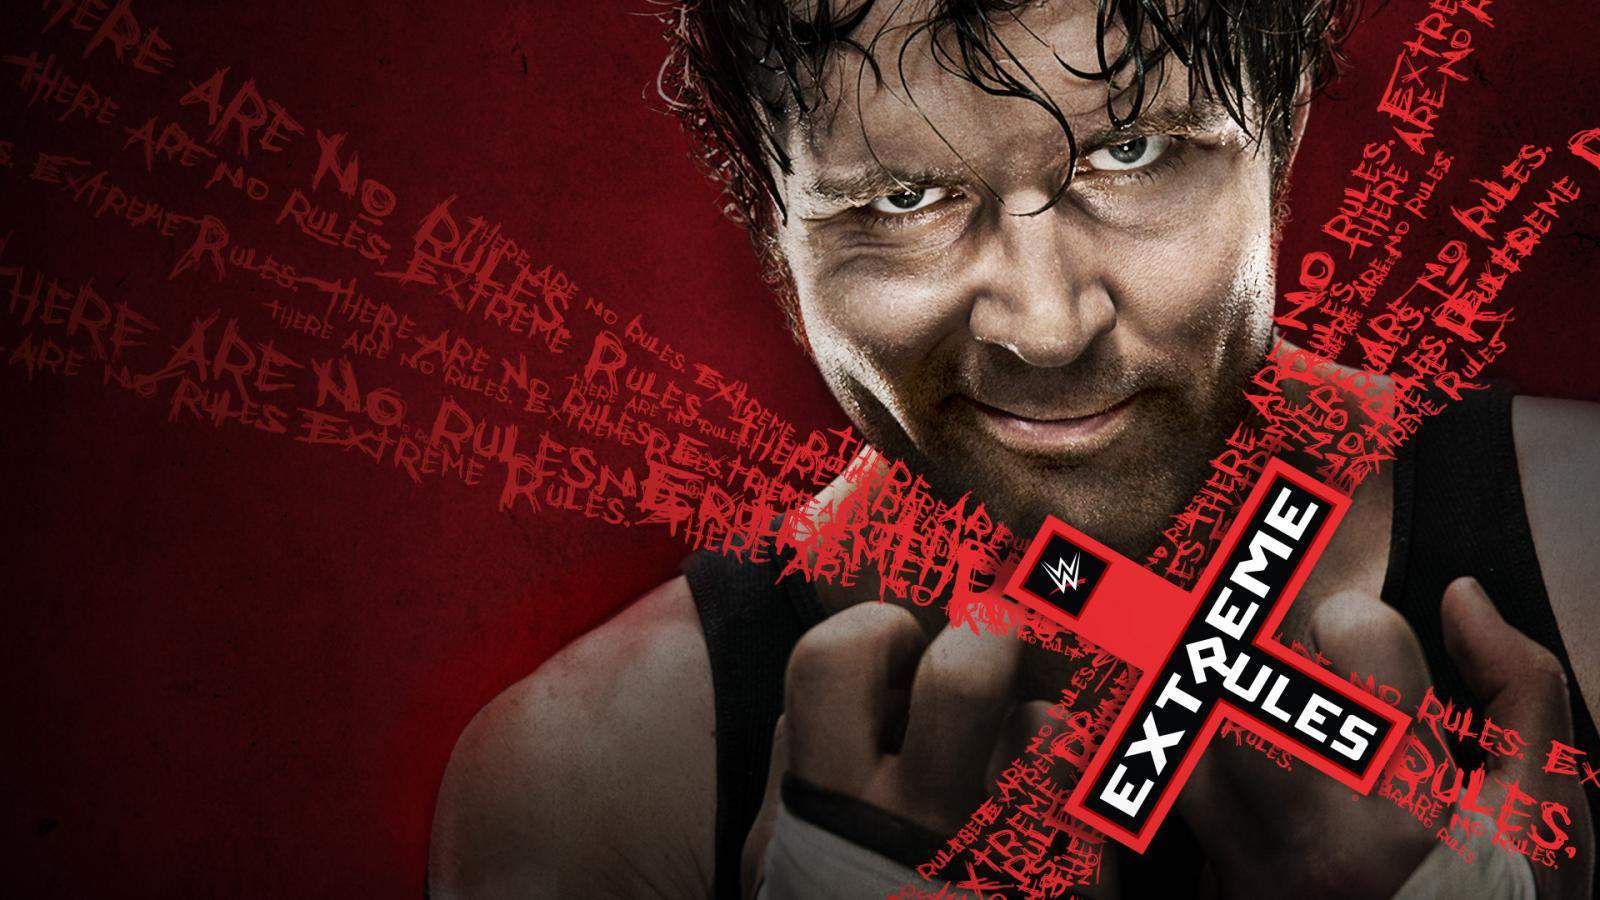  photo Extreme Rules 2016 Poster.jpg